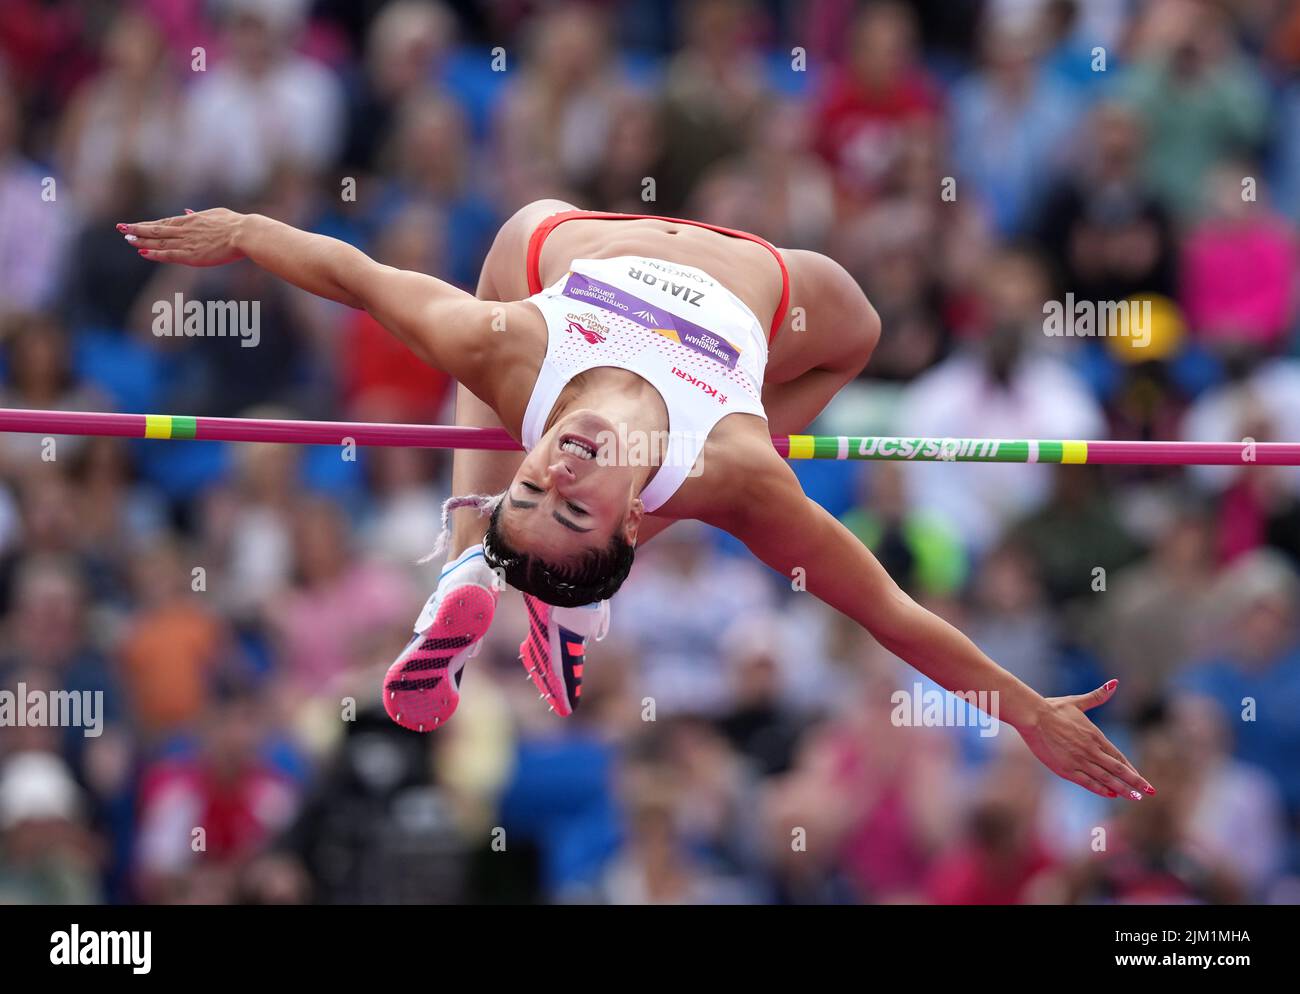 England's Laura Zialor in action during the Women's High Jump Qualifyng Round at Alexander Stadium on day seven of the 2022 Commonwealth Games in Birmingham. Picture date: Thursday August 4, 2022. Stock Photo